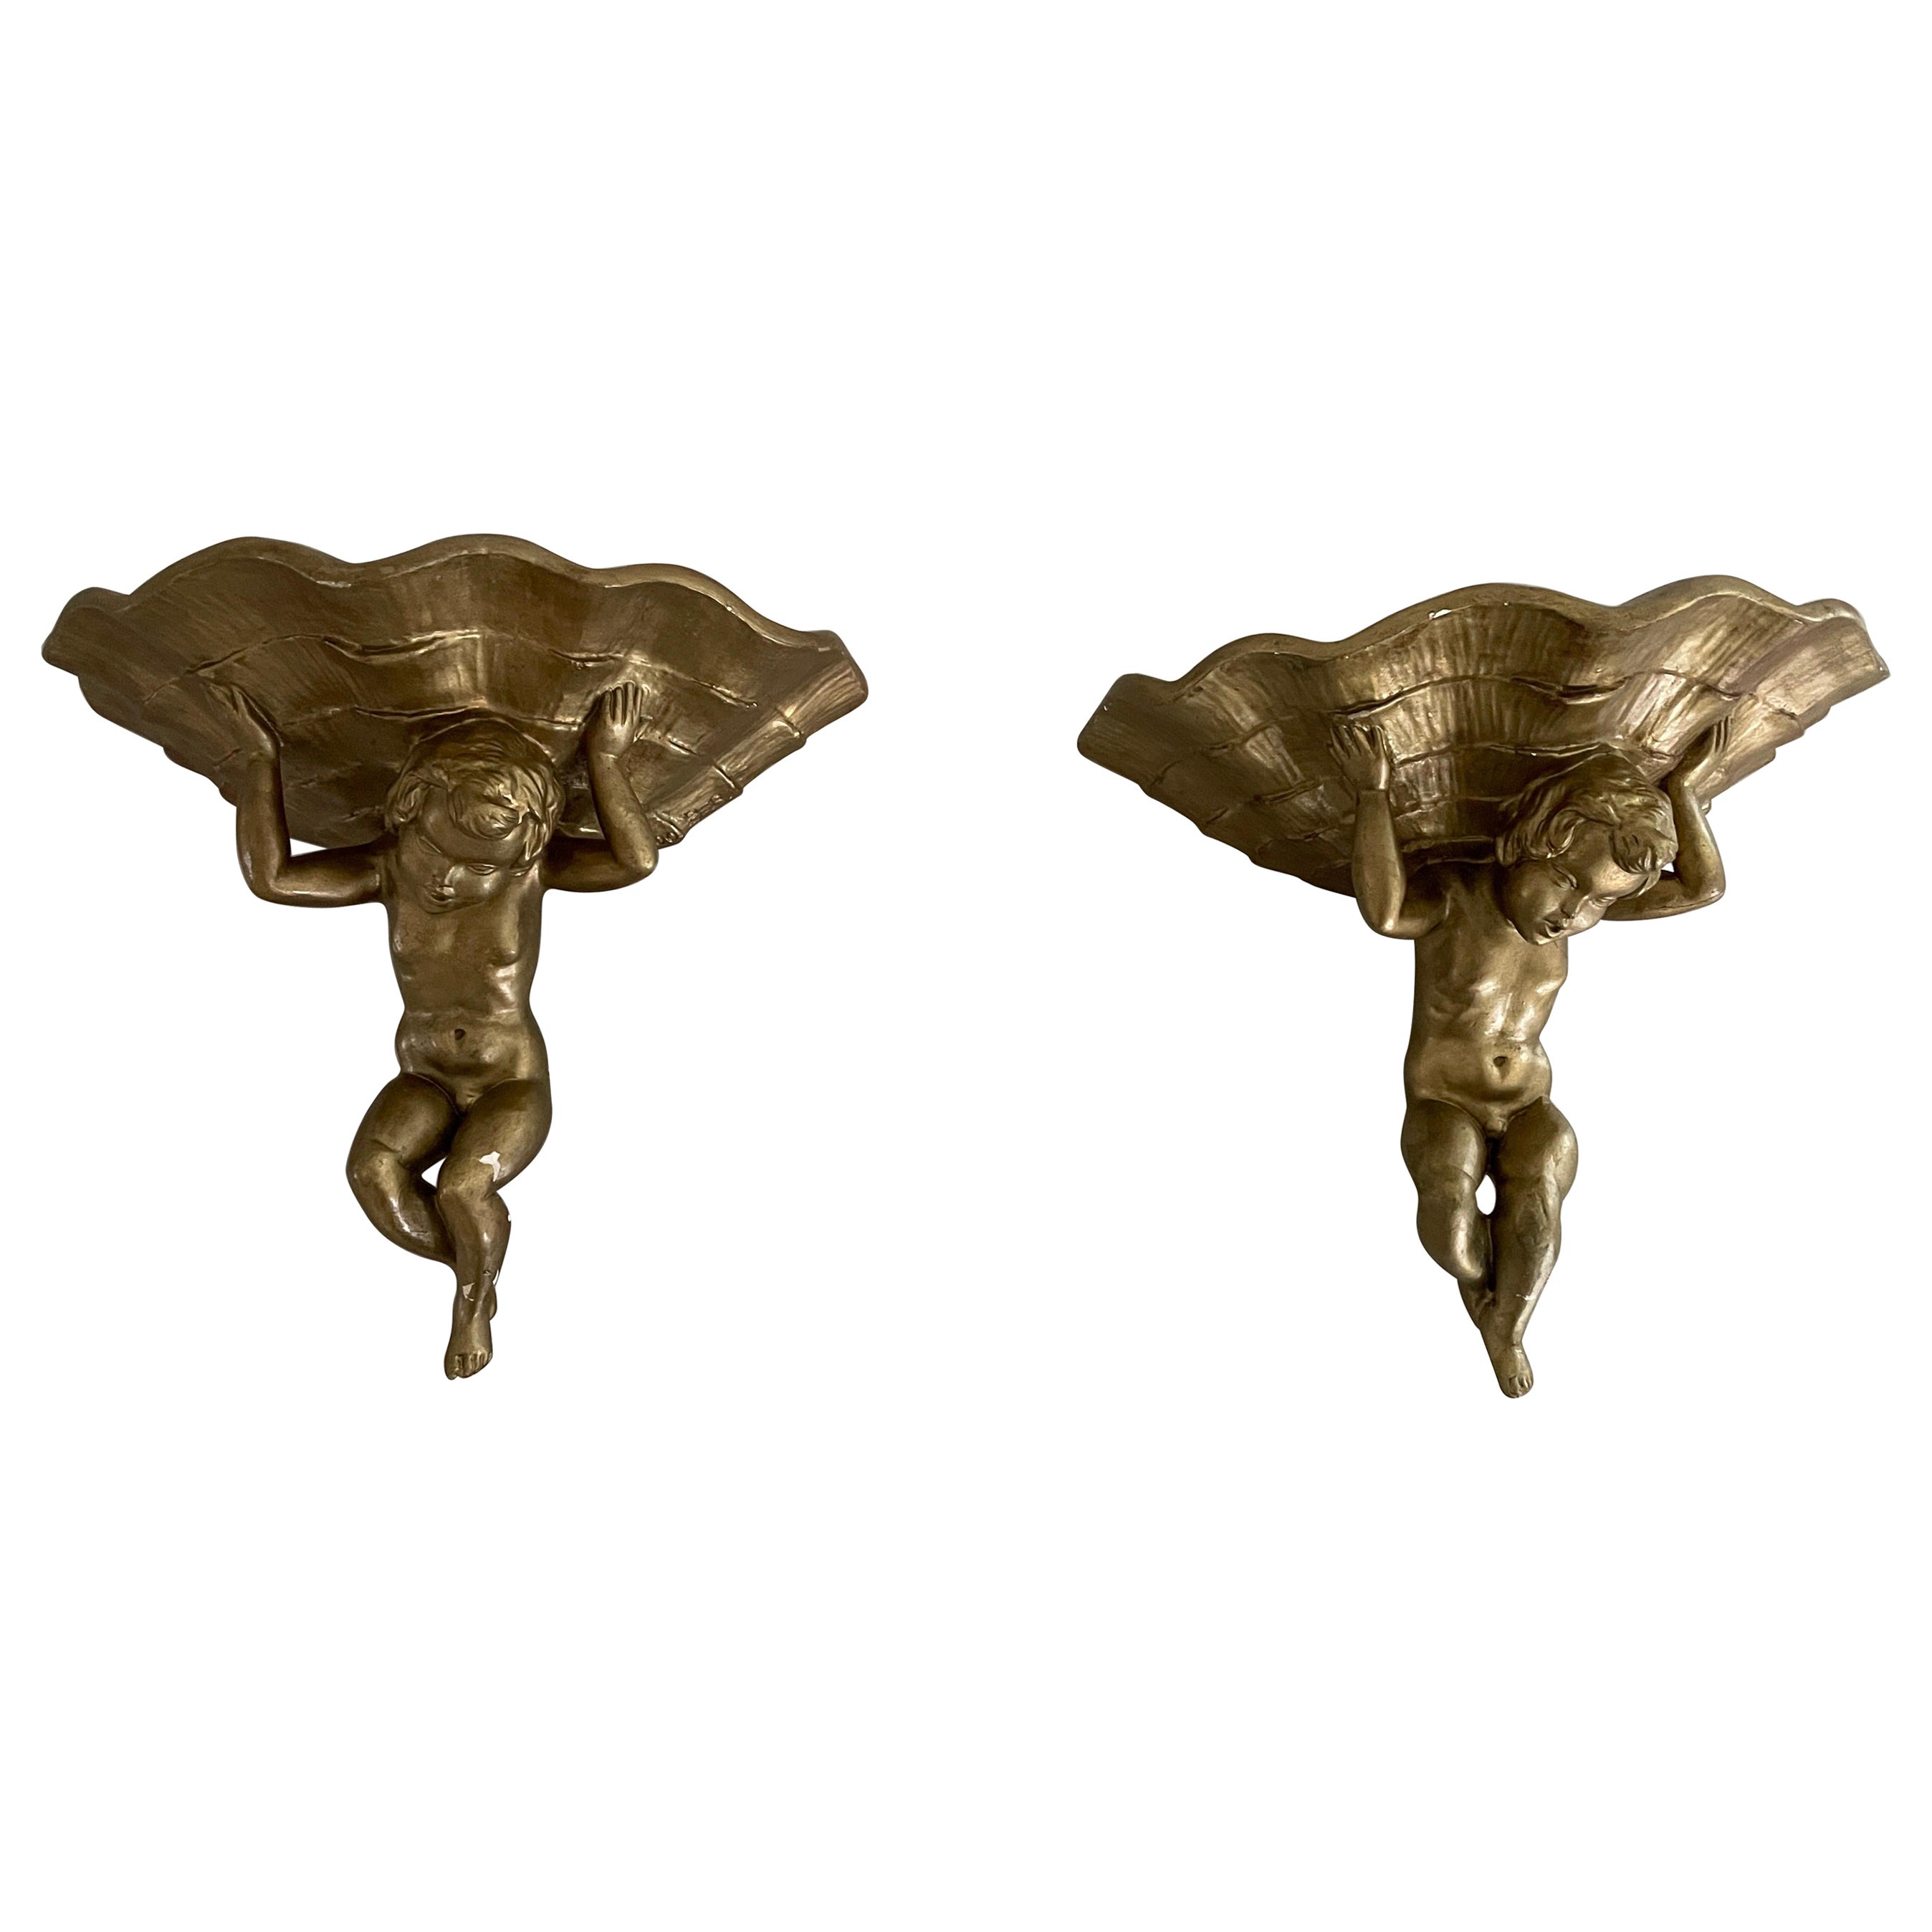 Made of Plaster Gold Coloured Pair of Sconces in Angel Sculpture, 1960s, Italy